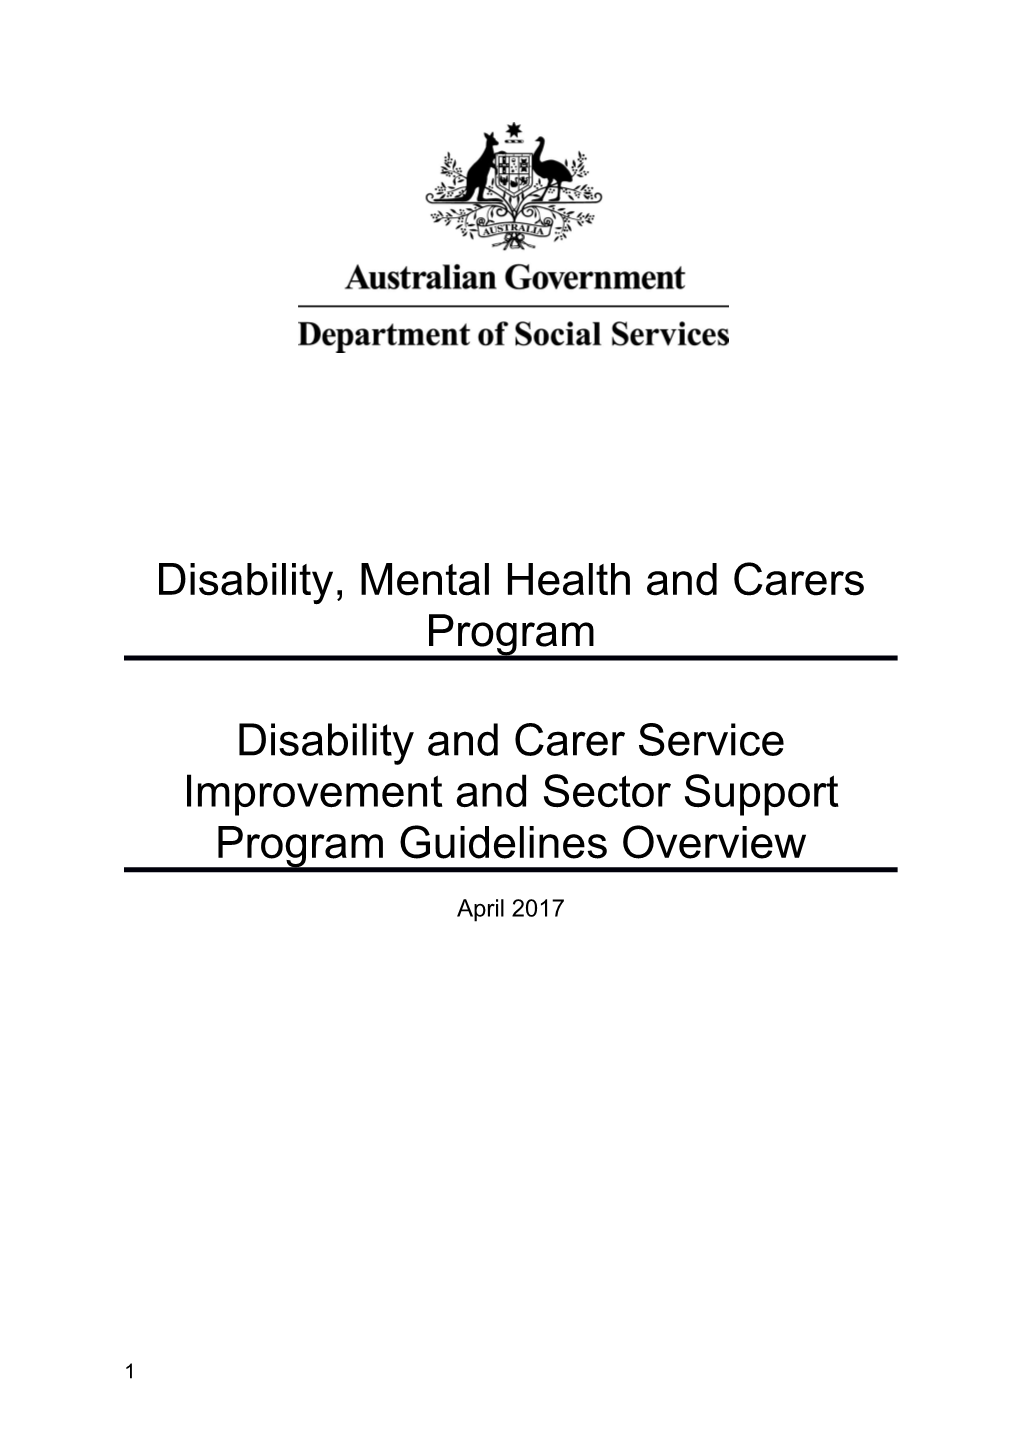 Disability and Carer Service Improvement & Sector Support Programme Guidelines